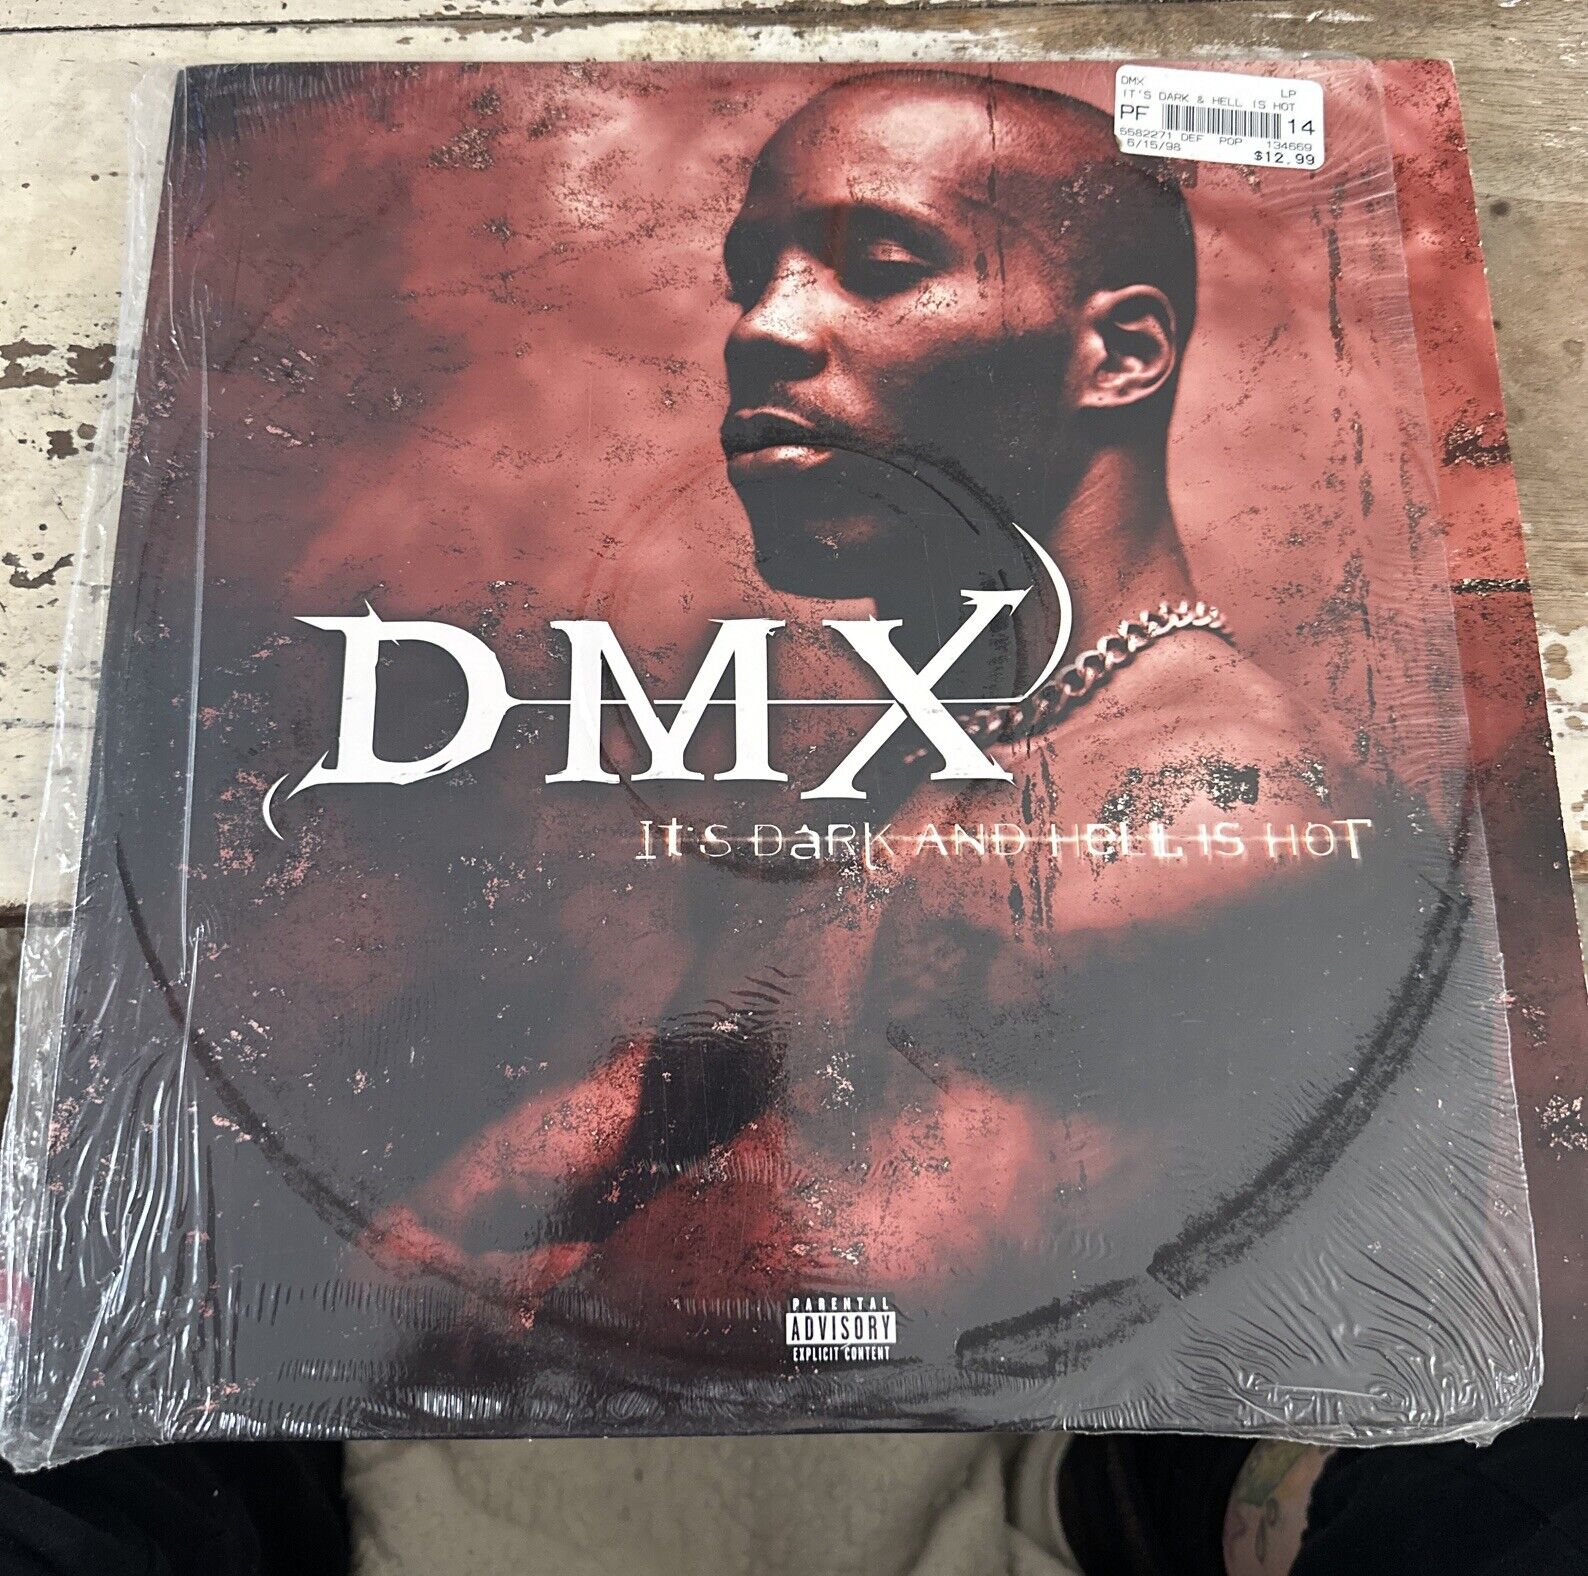 It\'s Dark and Hell Is Hot by Dmx (Record, 1998)